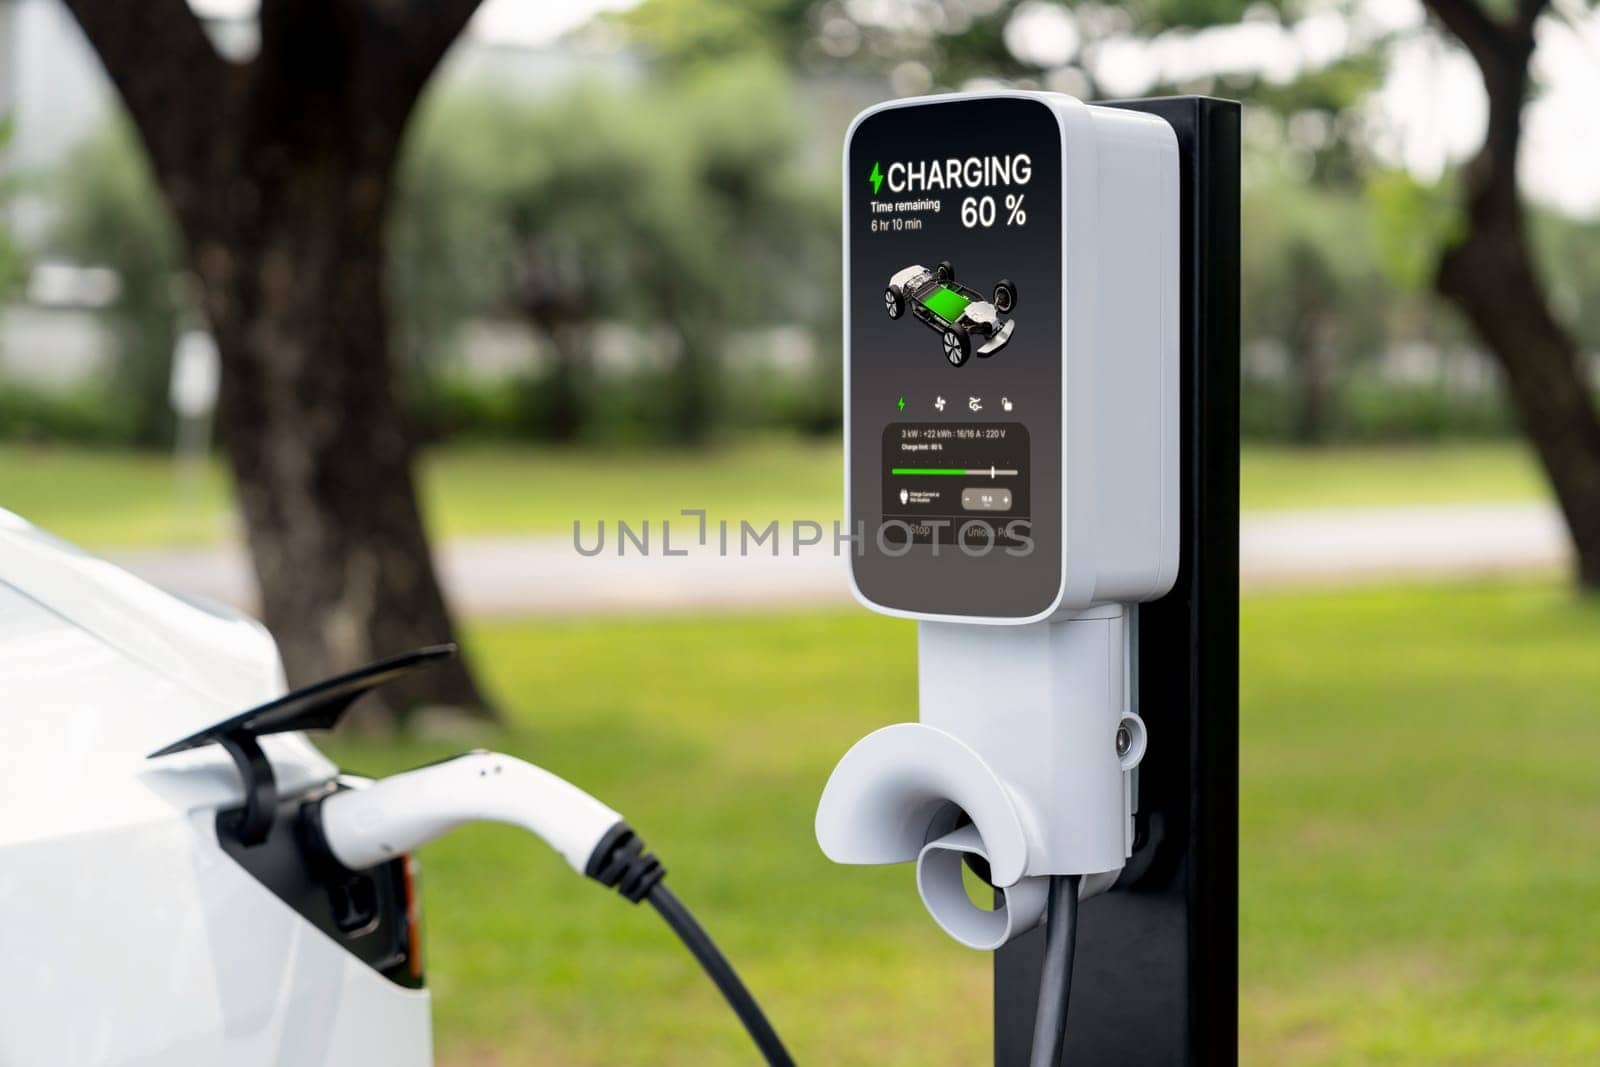 EV electric vehicle recharging battery from EV charging station in outdoor green city park scenic. Natural protection with eco friendly EV car travel. Exalt